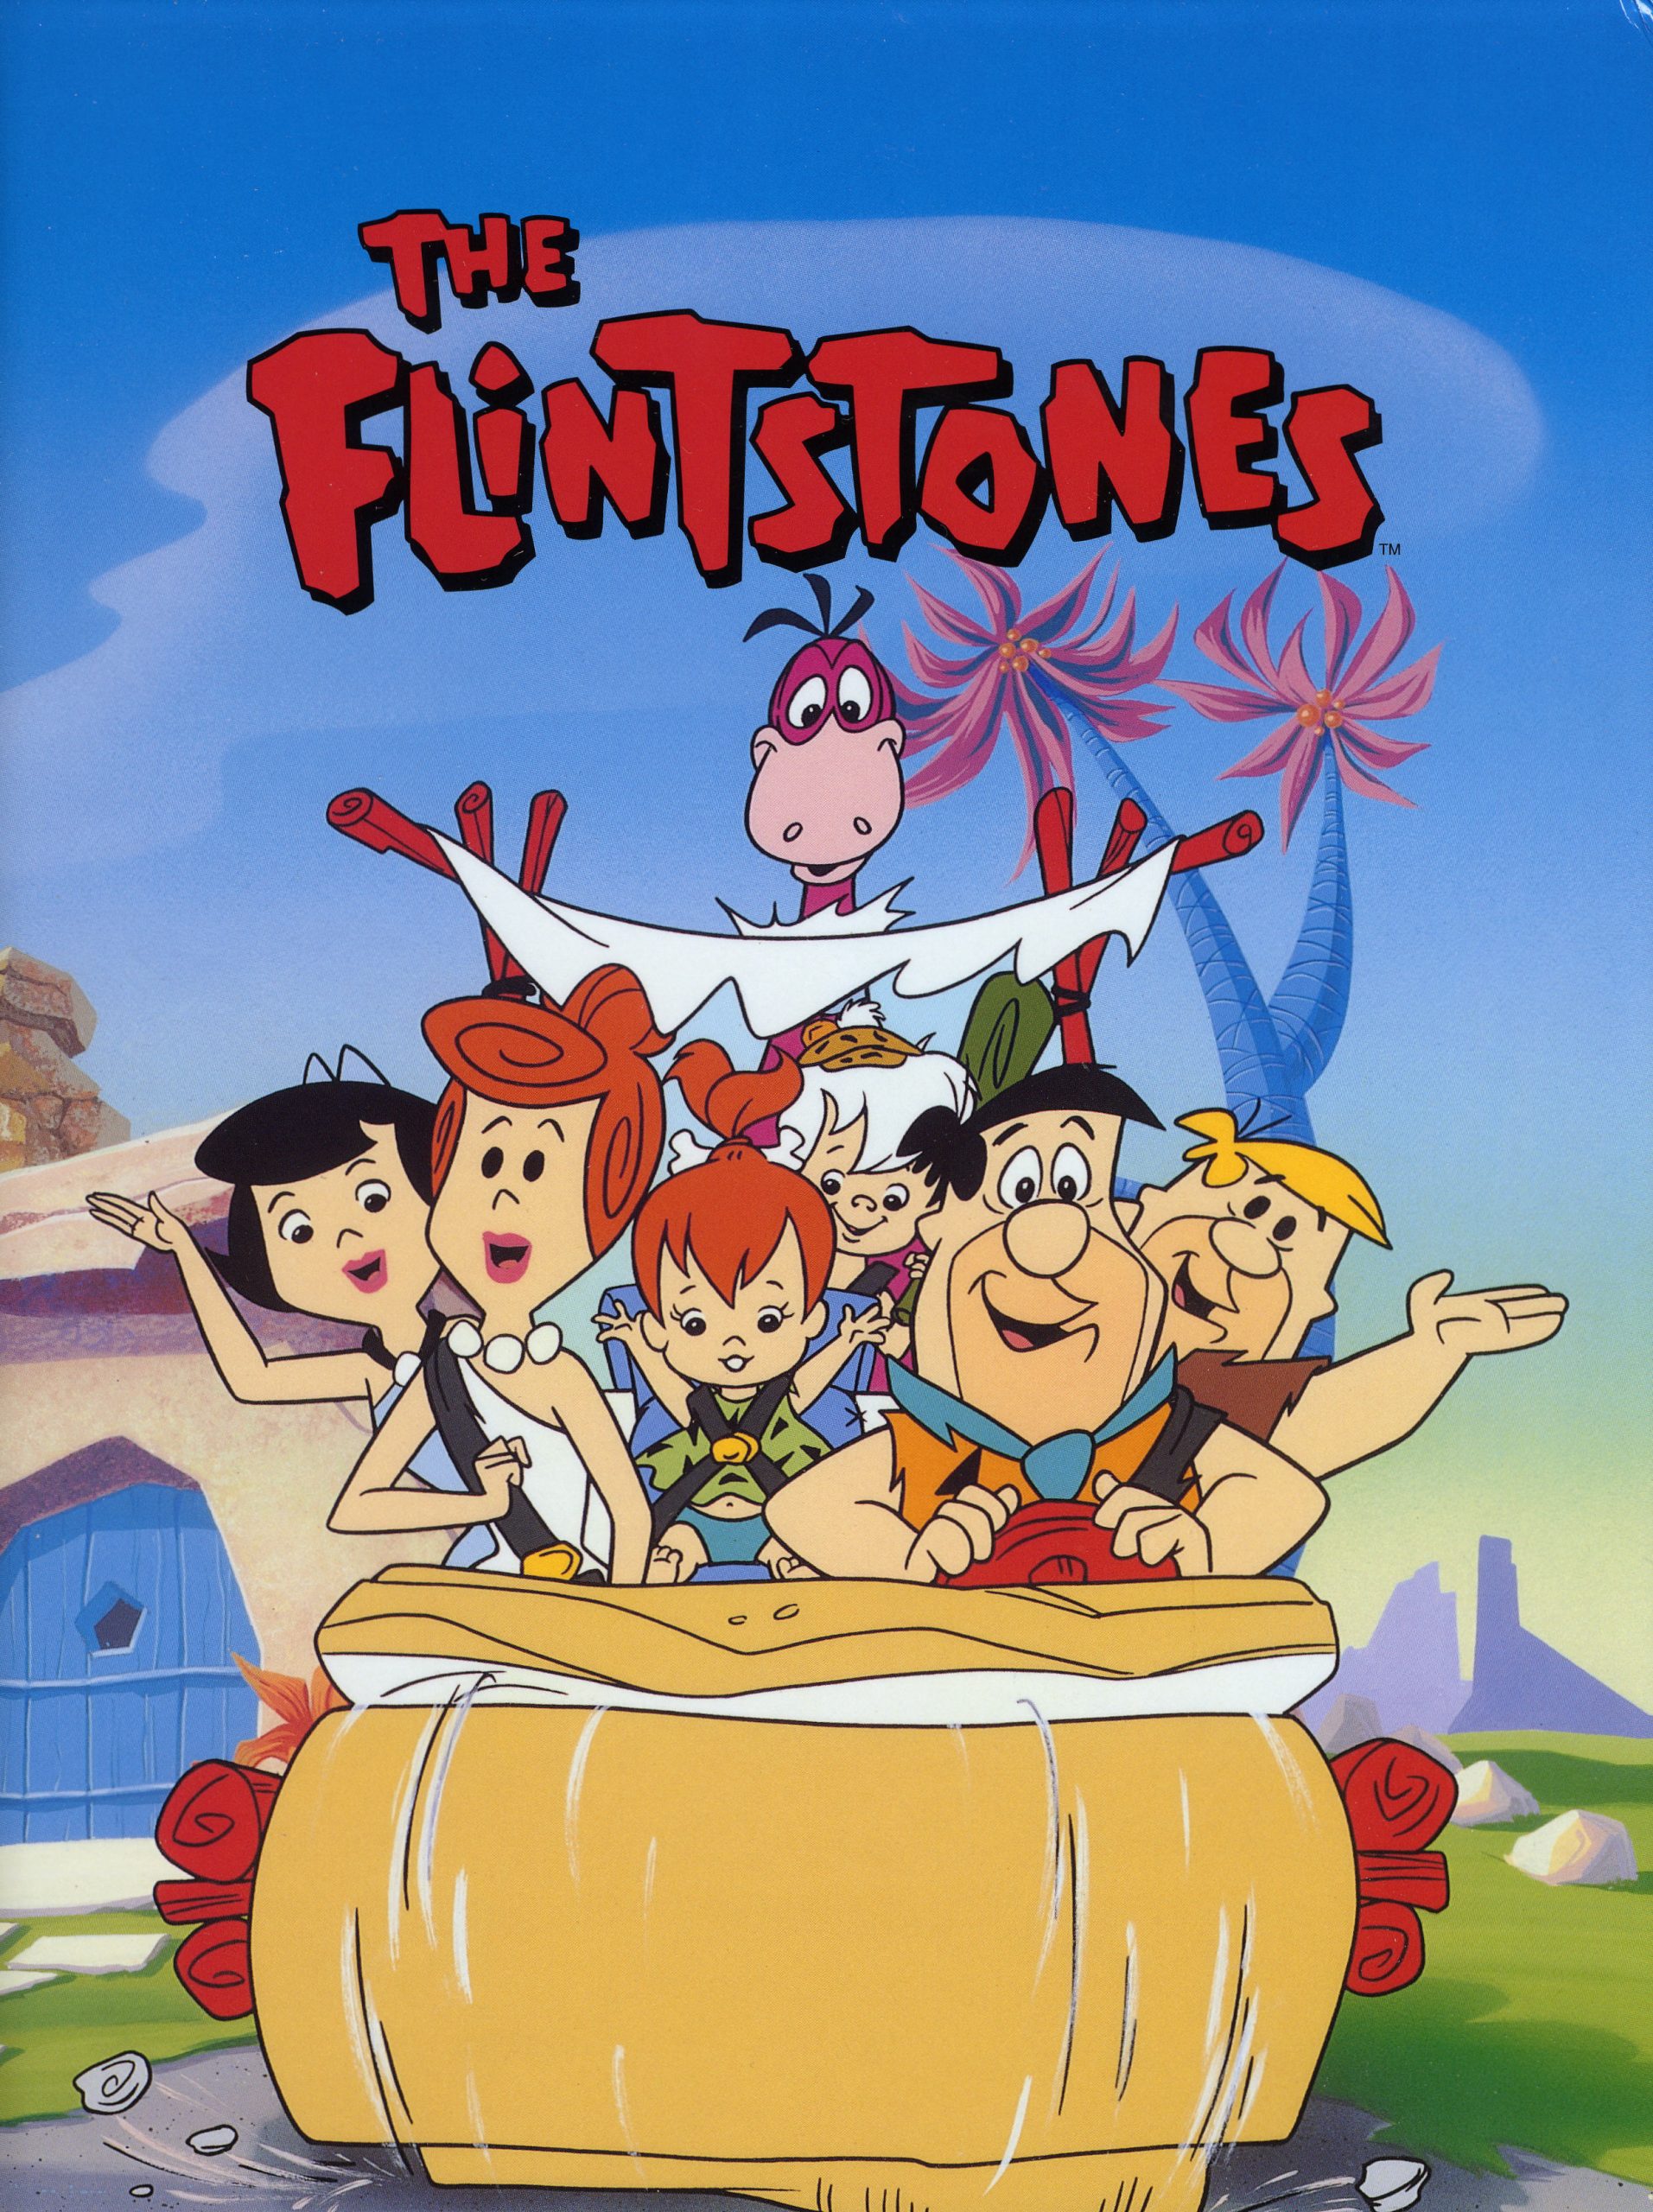 The-Flintstones-Best-Old-Hindi-Dubbed-Cartoons-That-We-All-Love - Pop  Culture, Entertainment, Humor, Travel & More